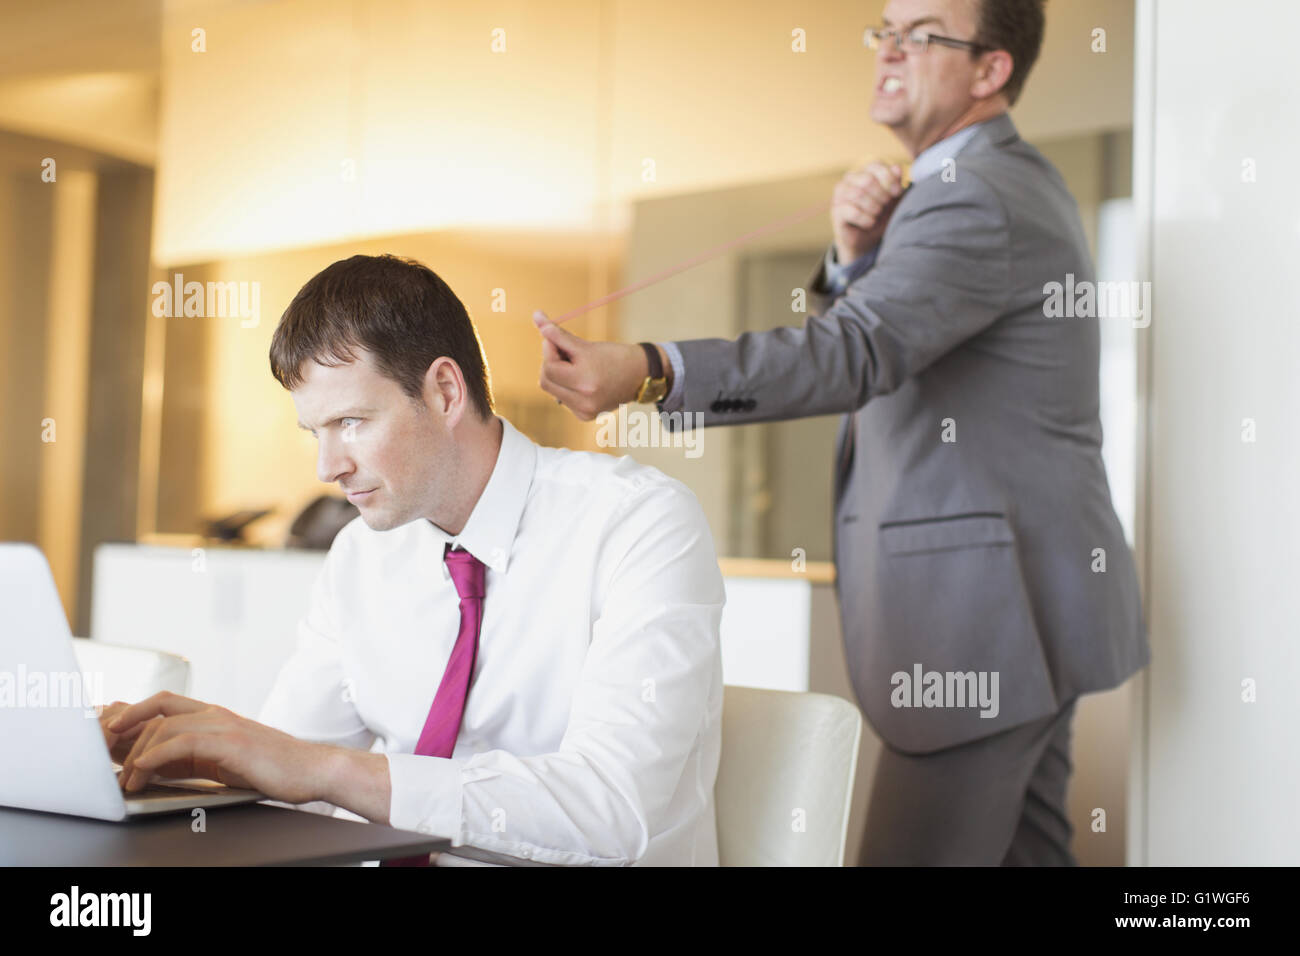 Angry businessman aiming rubber band at unsuspecting businessman working at laptop Stock Photo